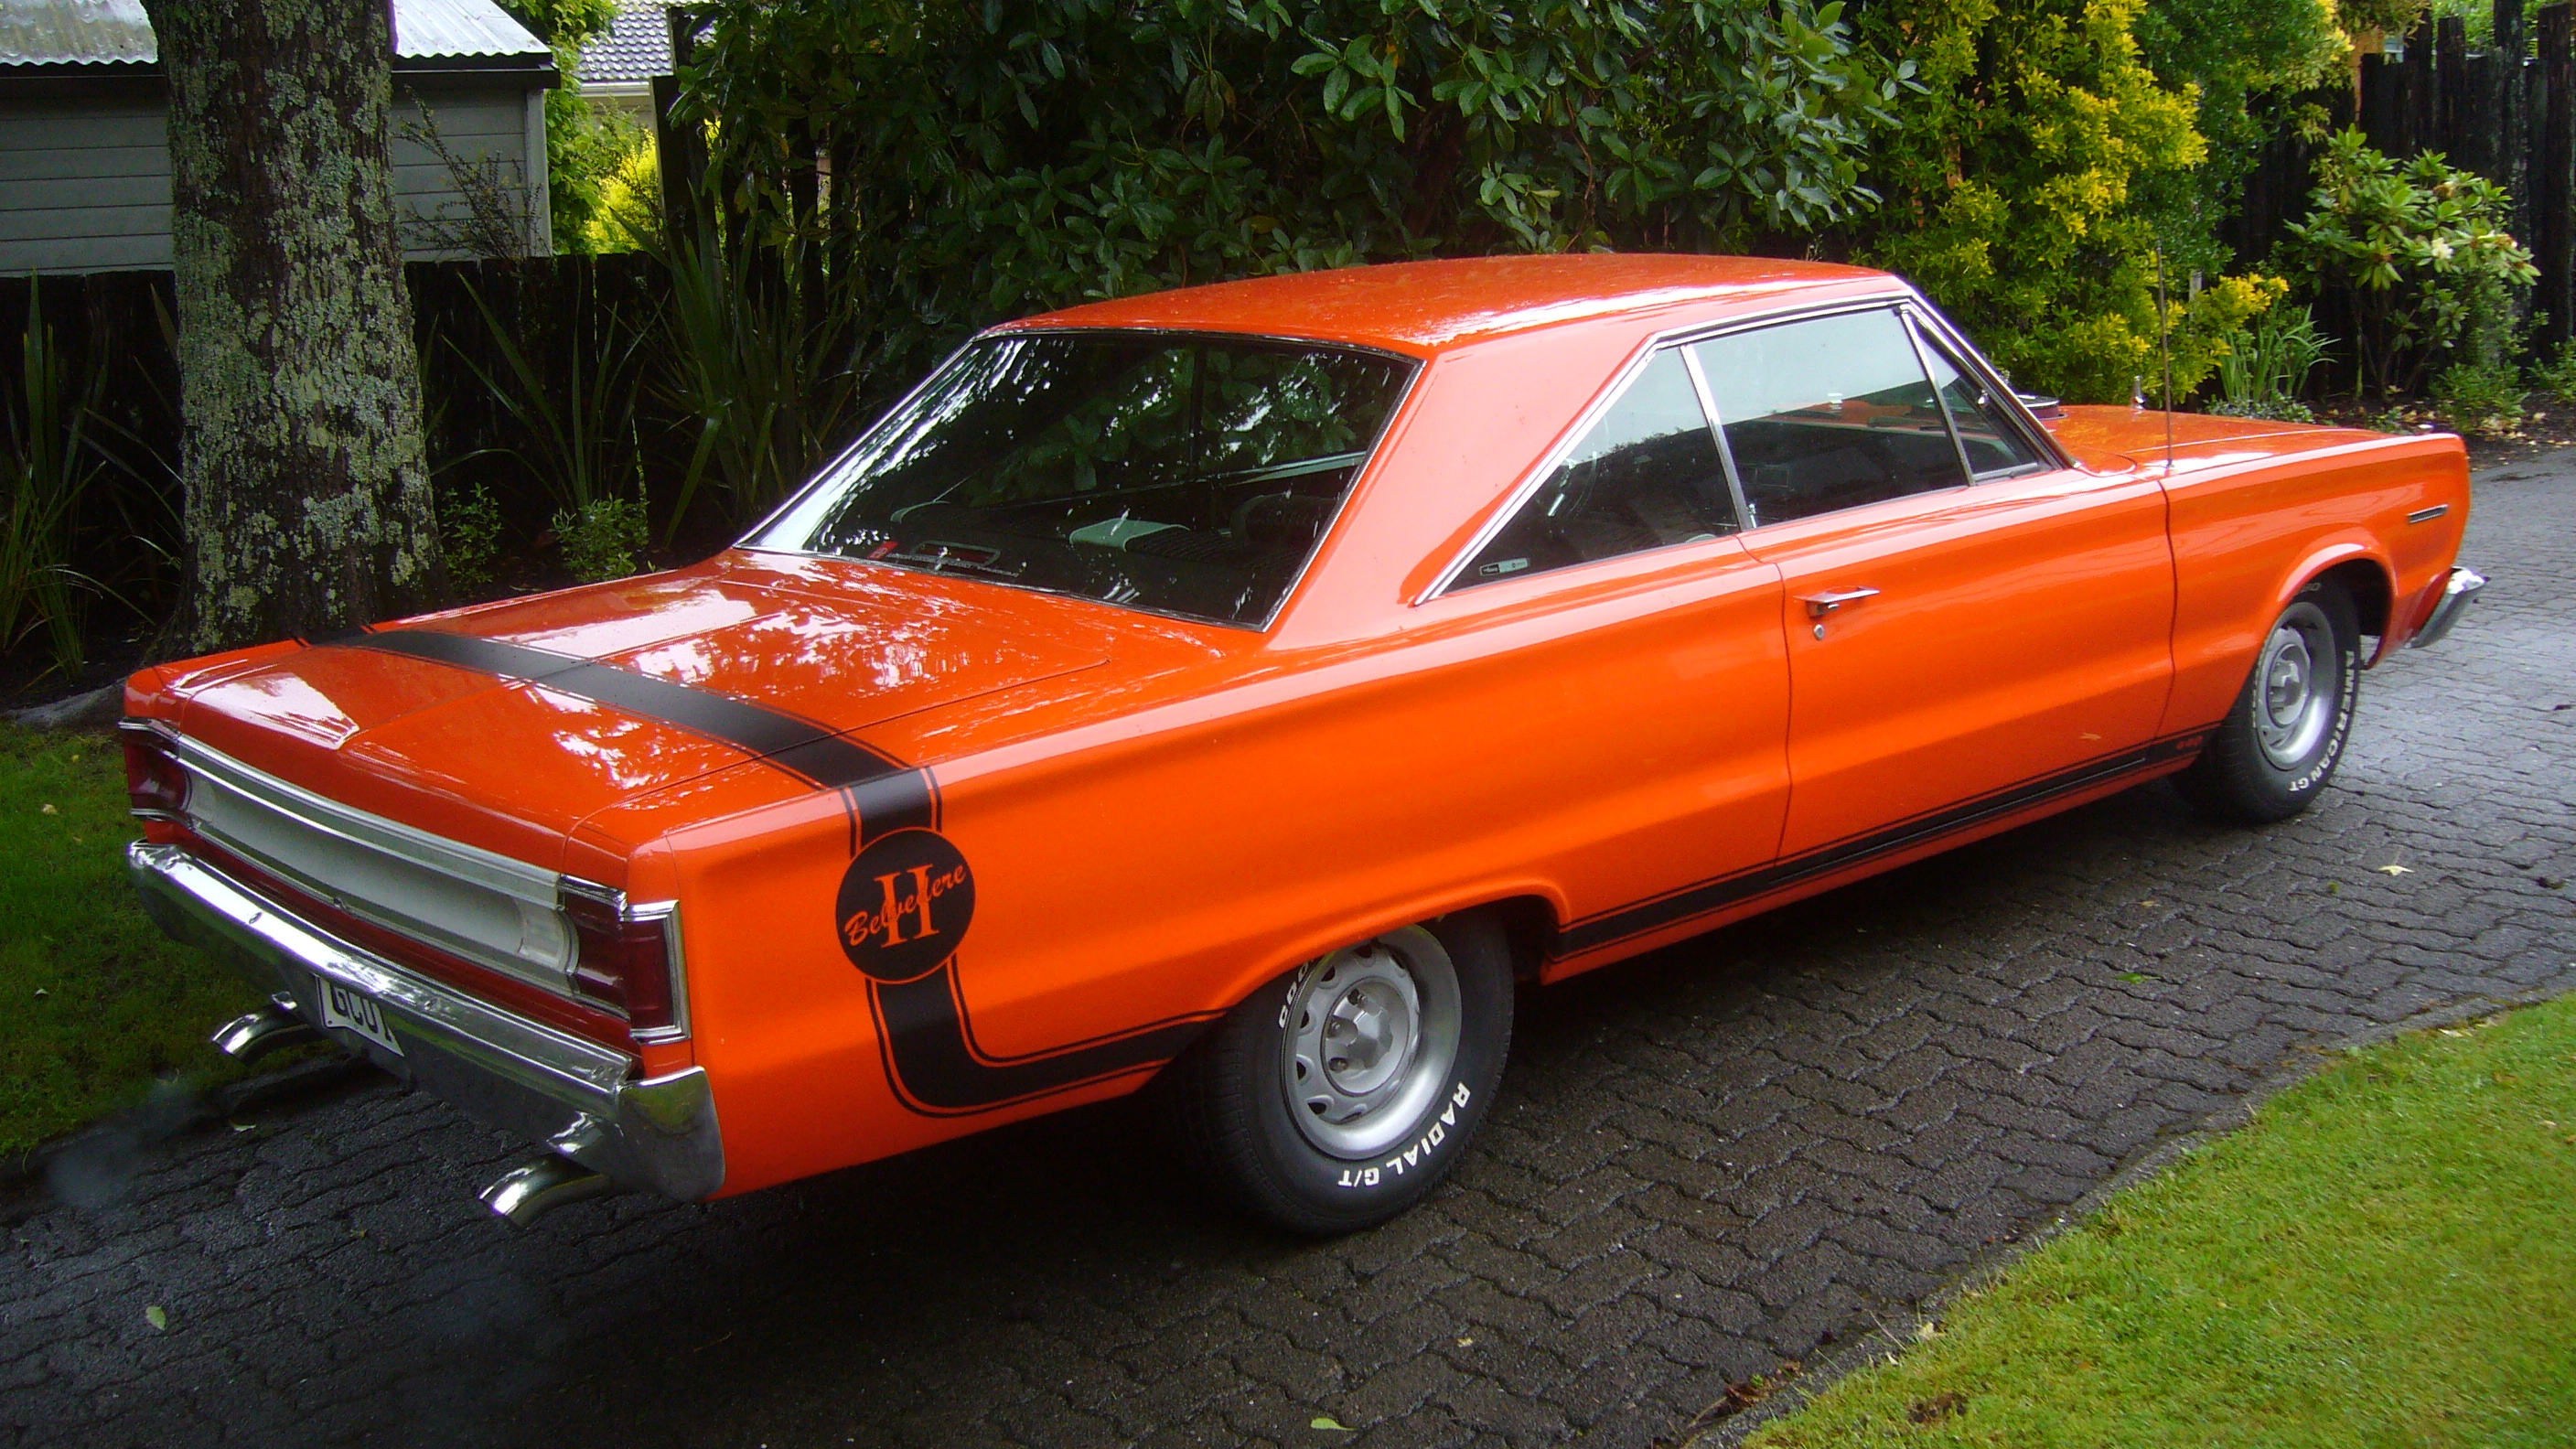 Red's 1967 Plymouth Belvedere II - Holley My Garage